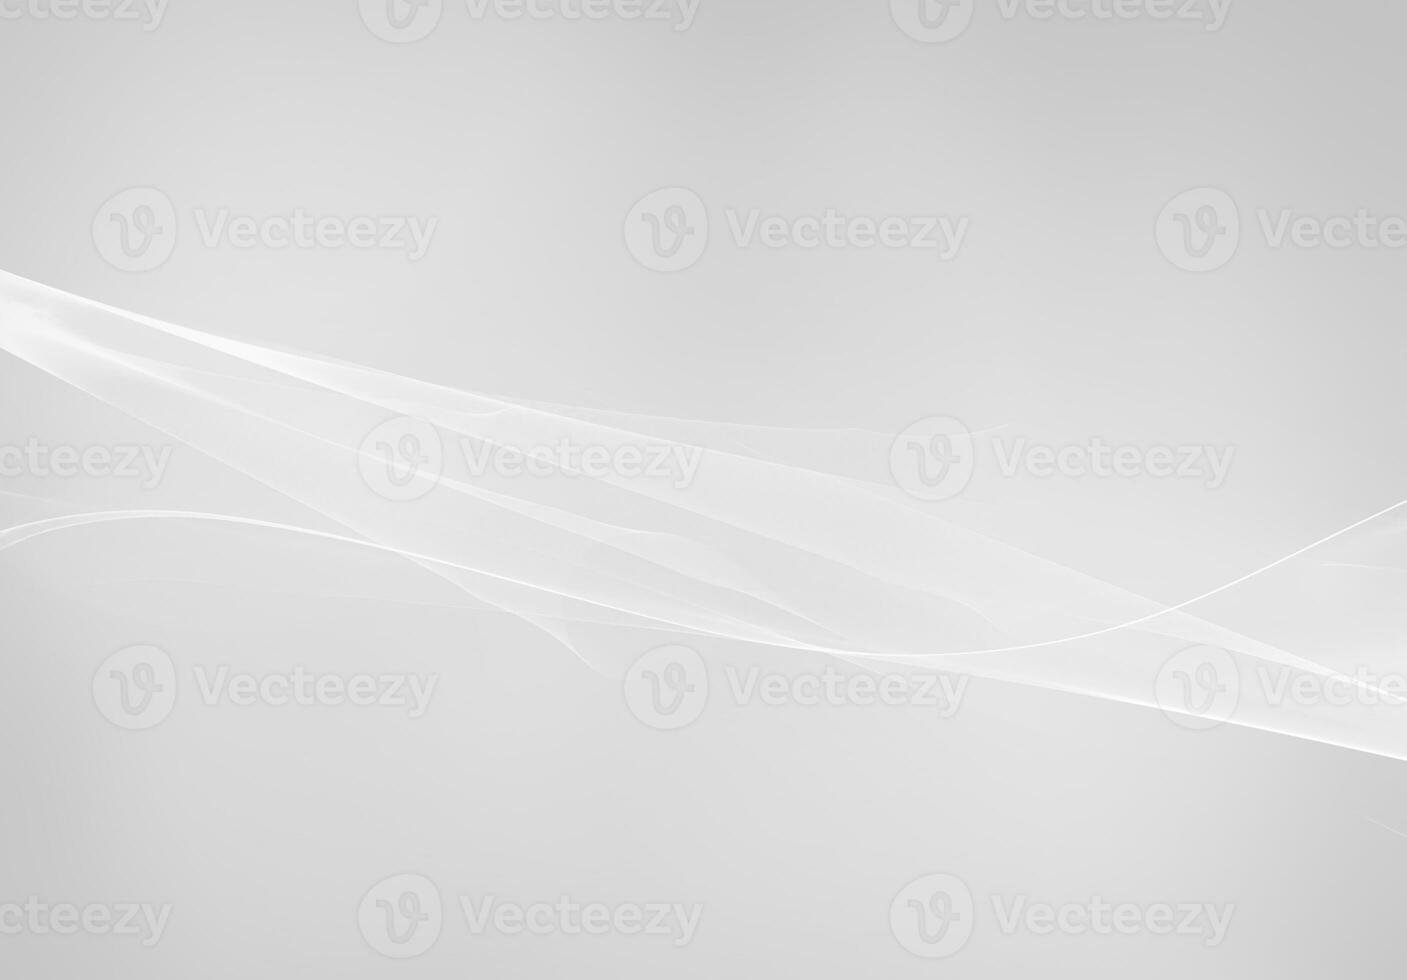 Abstract background with flowing lines photo